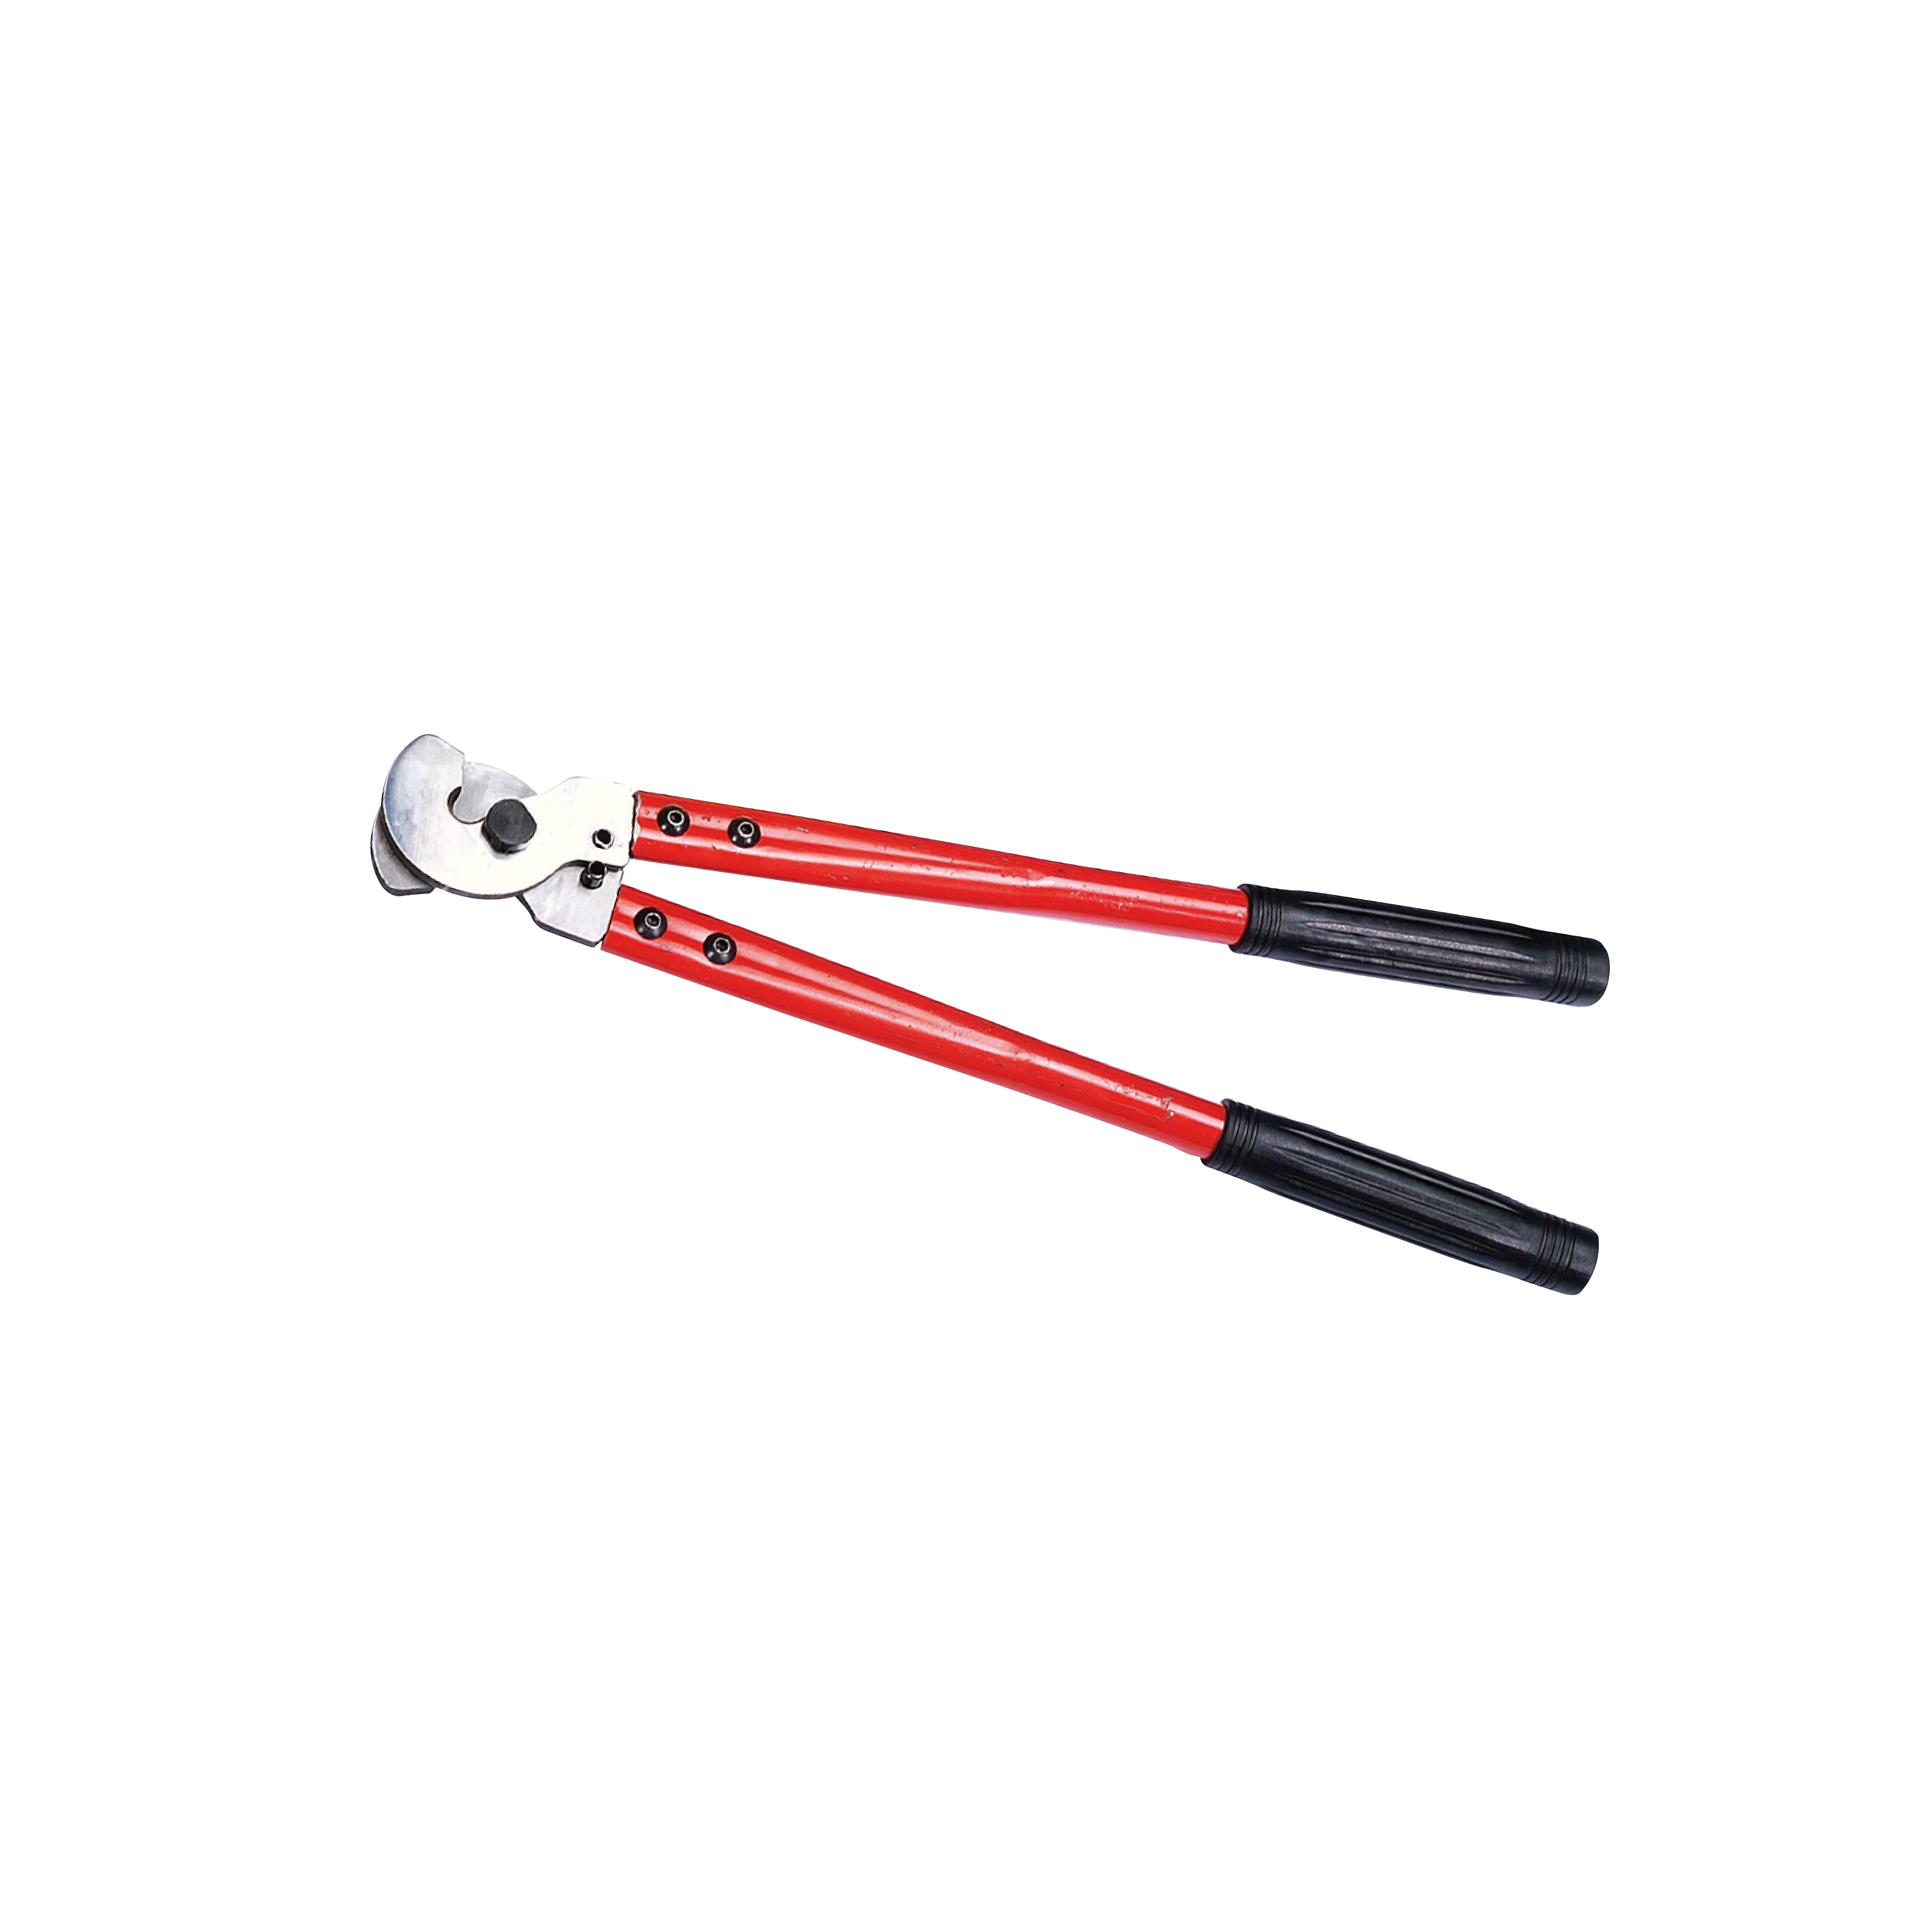 AC-100 HAND CABLE CUTTERS-AC-100